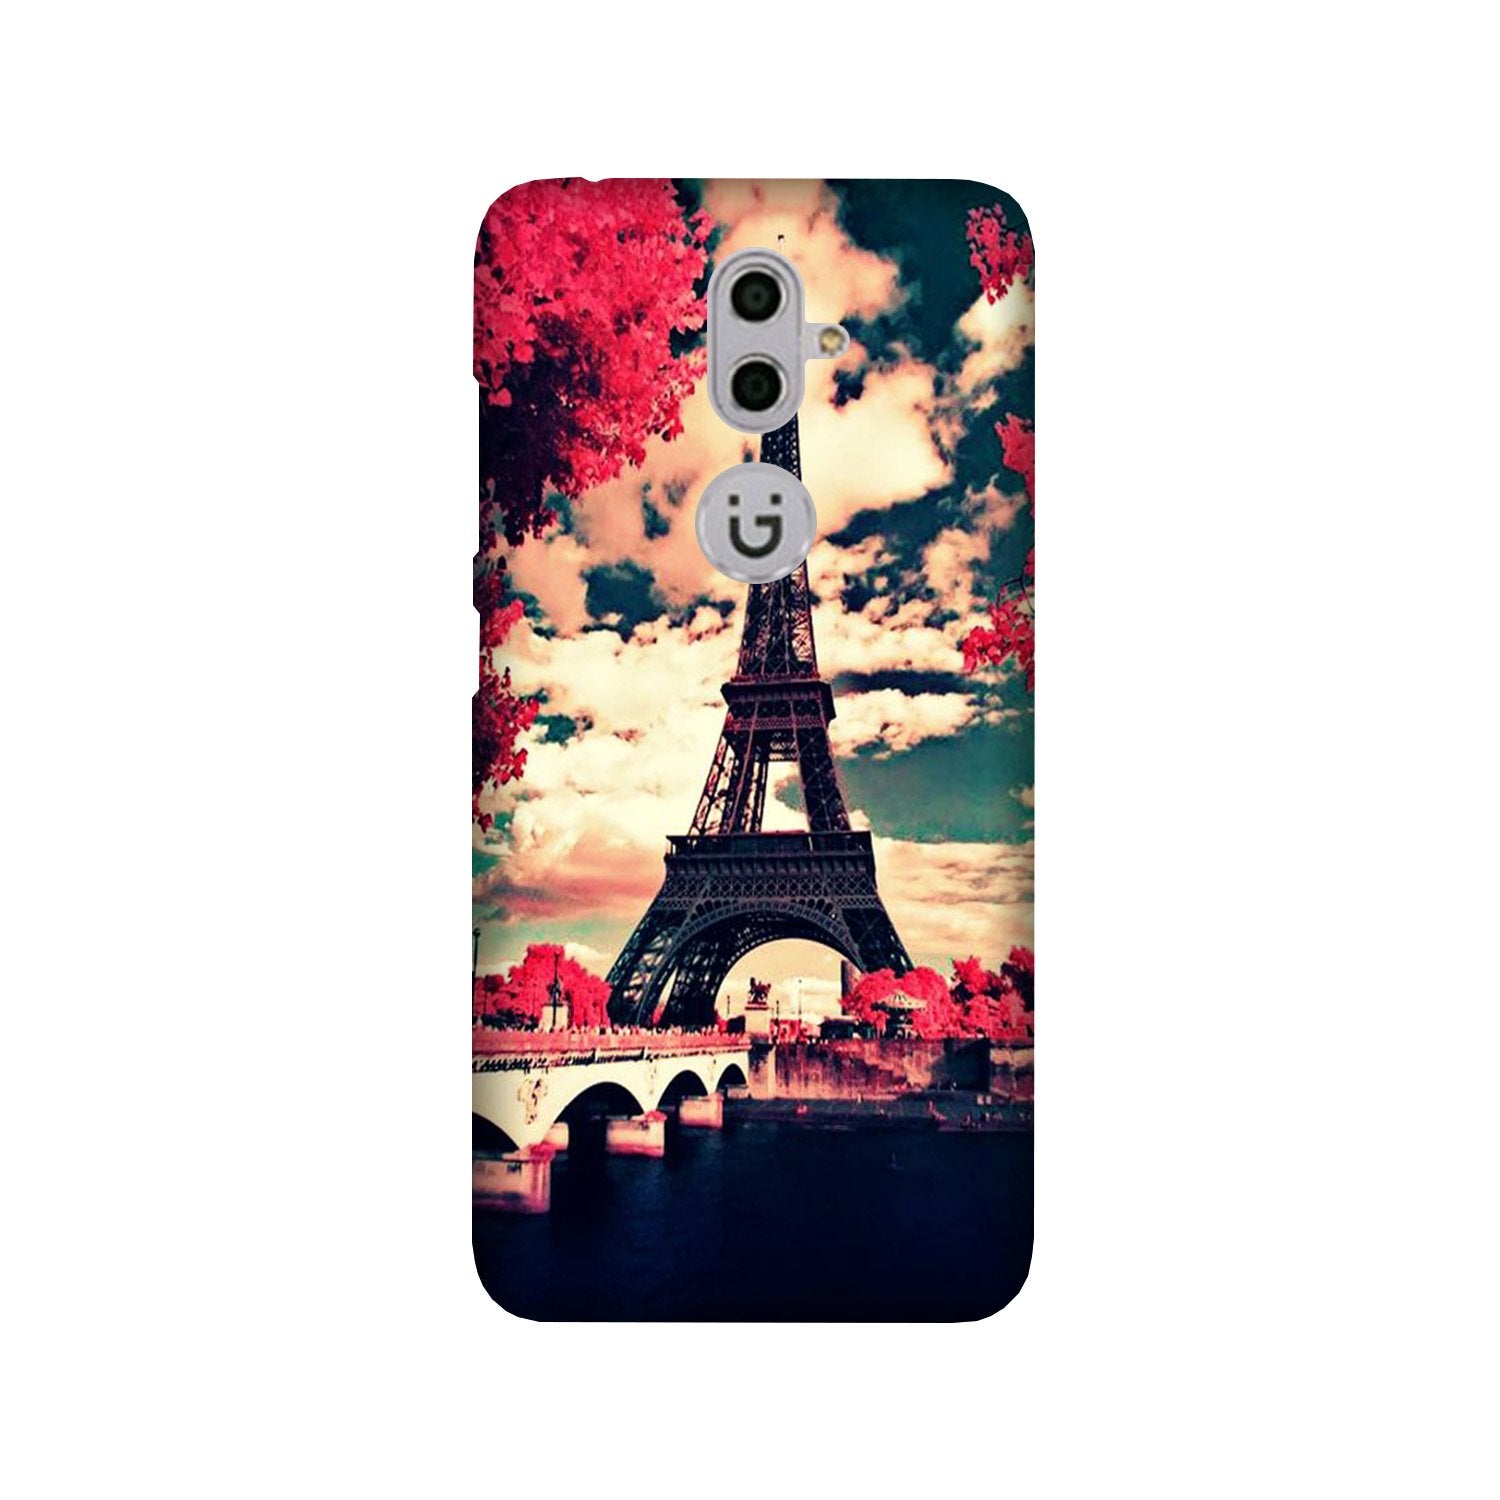 Eiffel Tower Case for Gionee S9 (Design No. 212)